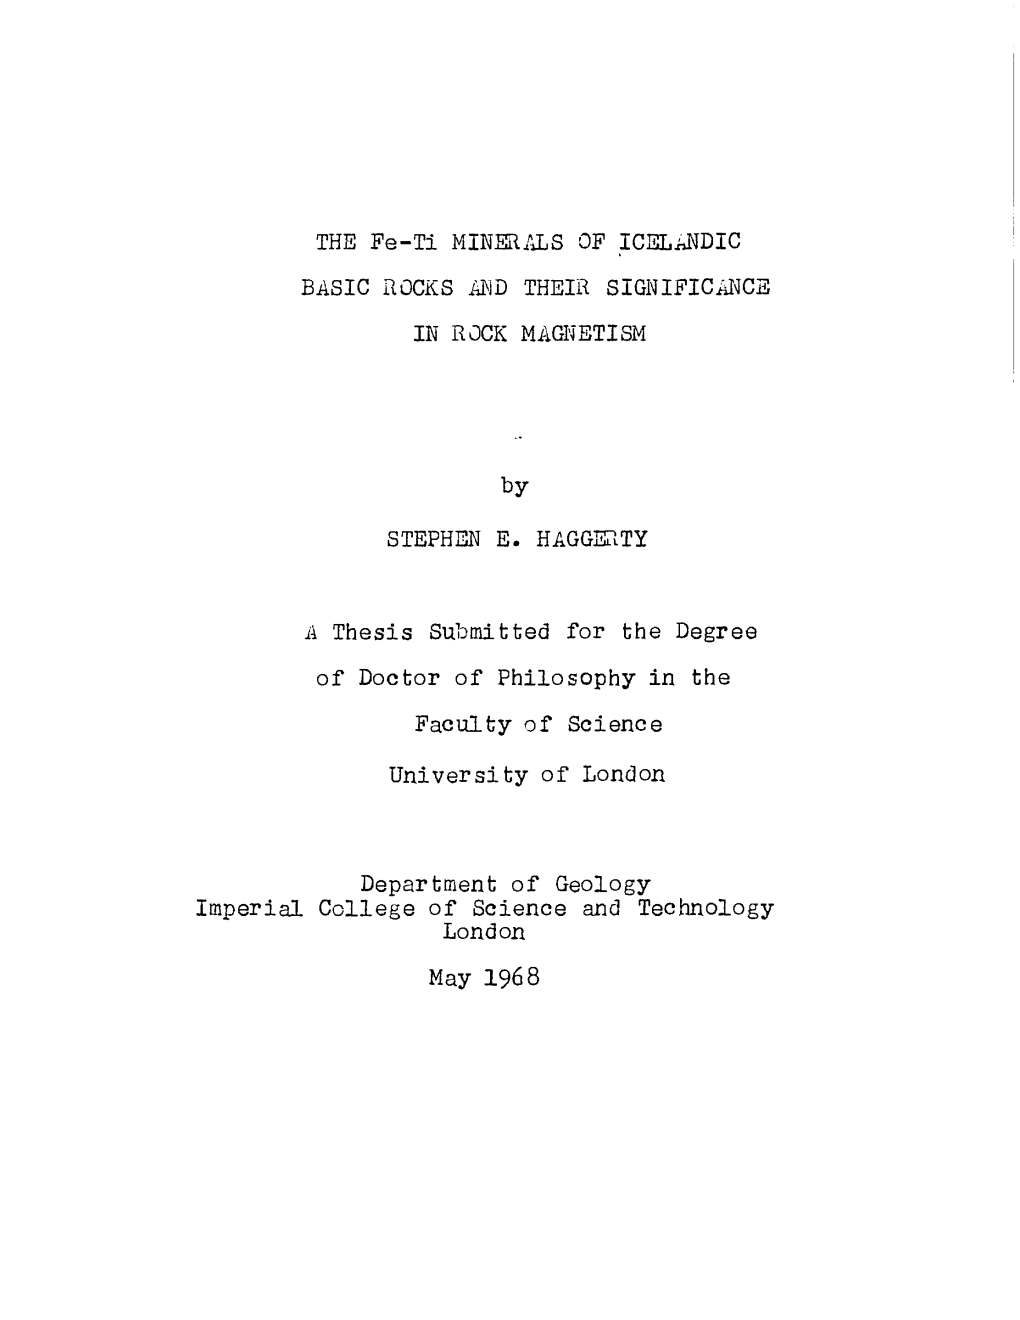 BASIC ROCKS and THEIR SIGNIFICANCE in ROCK MAGNETISM by STEPHEN E. HAGGERTY a Thesis Submitted for the Degree of Doctor of Philo